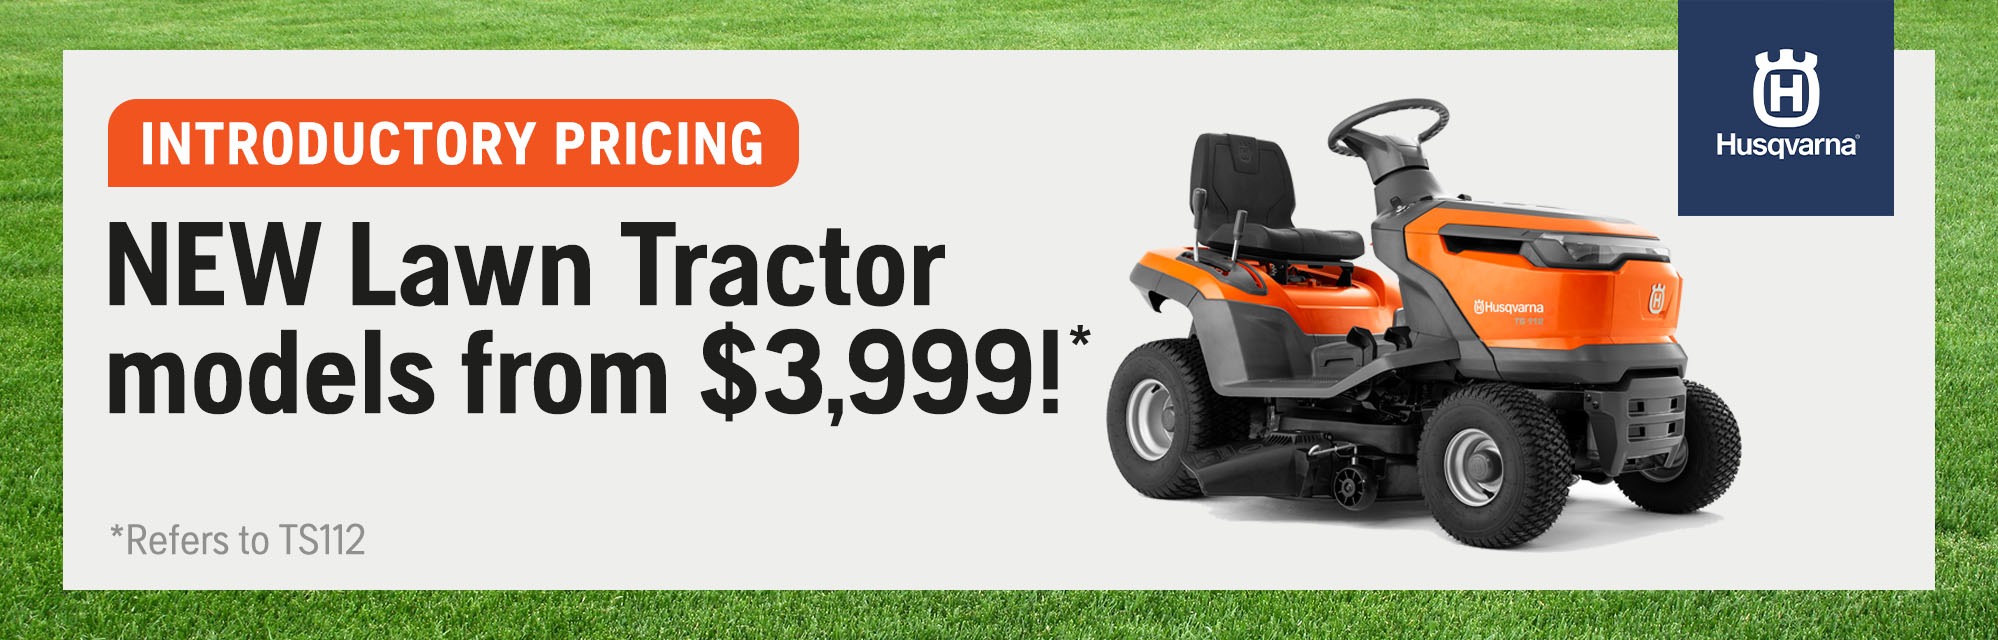 8. INTRODUCTORY PRICING - Lawn Tractor